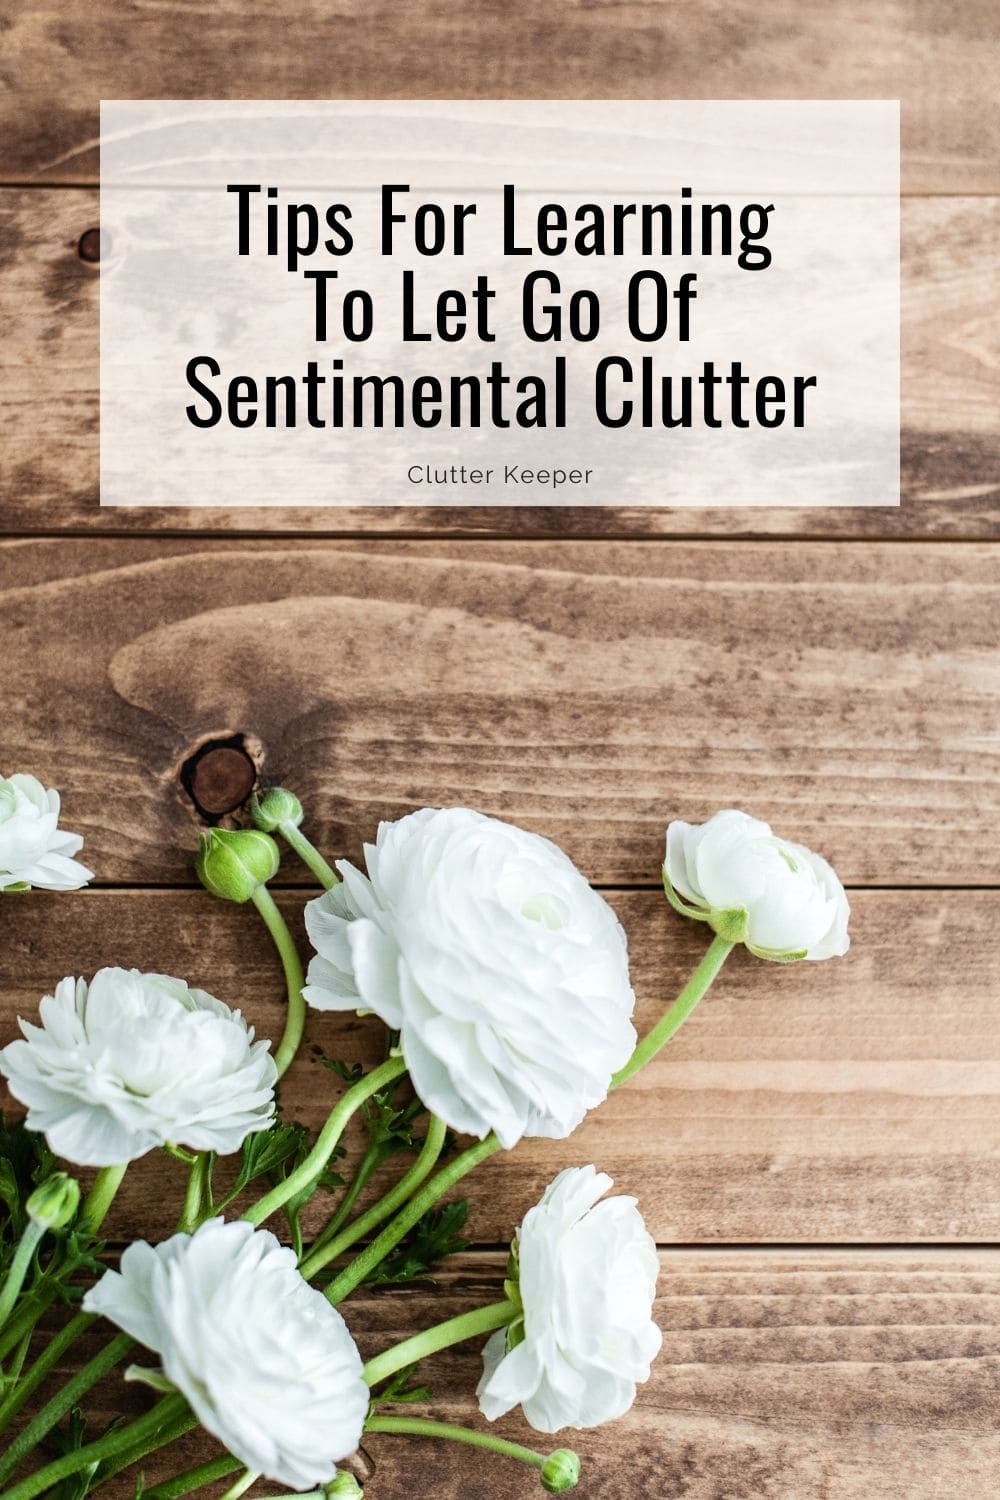 Tips for learning to let go of sentimental clutter.